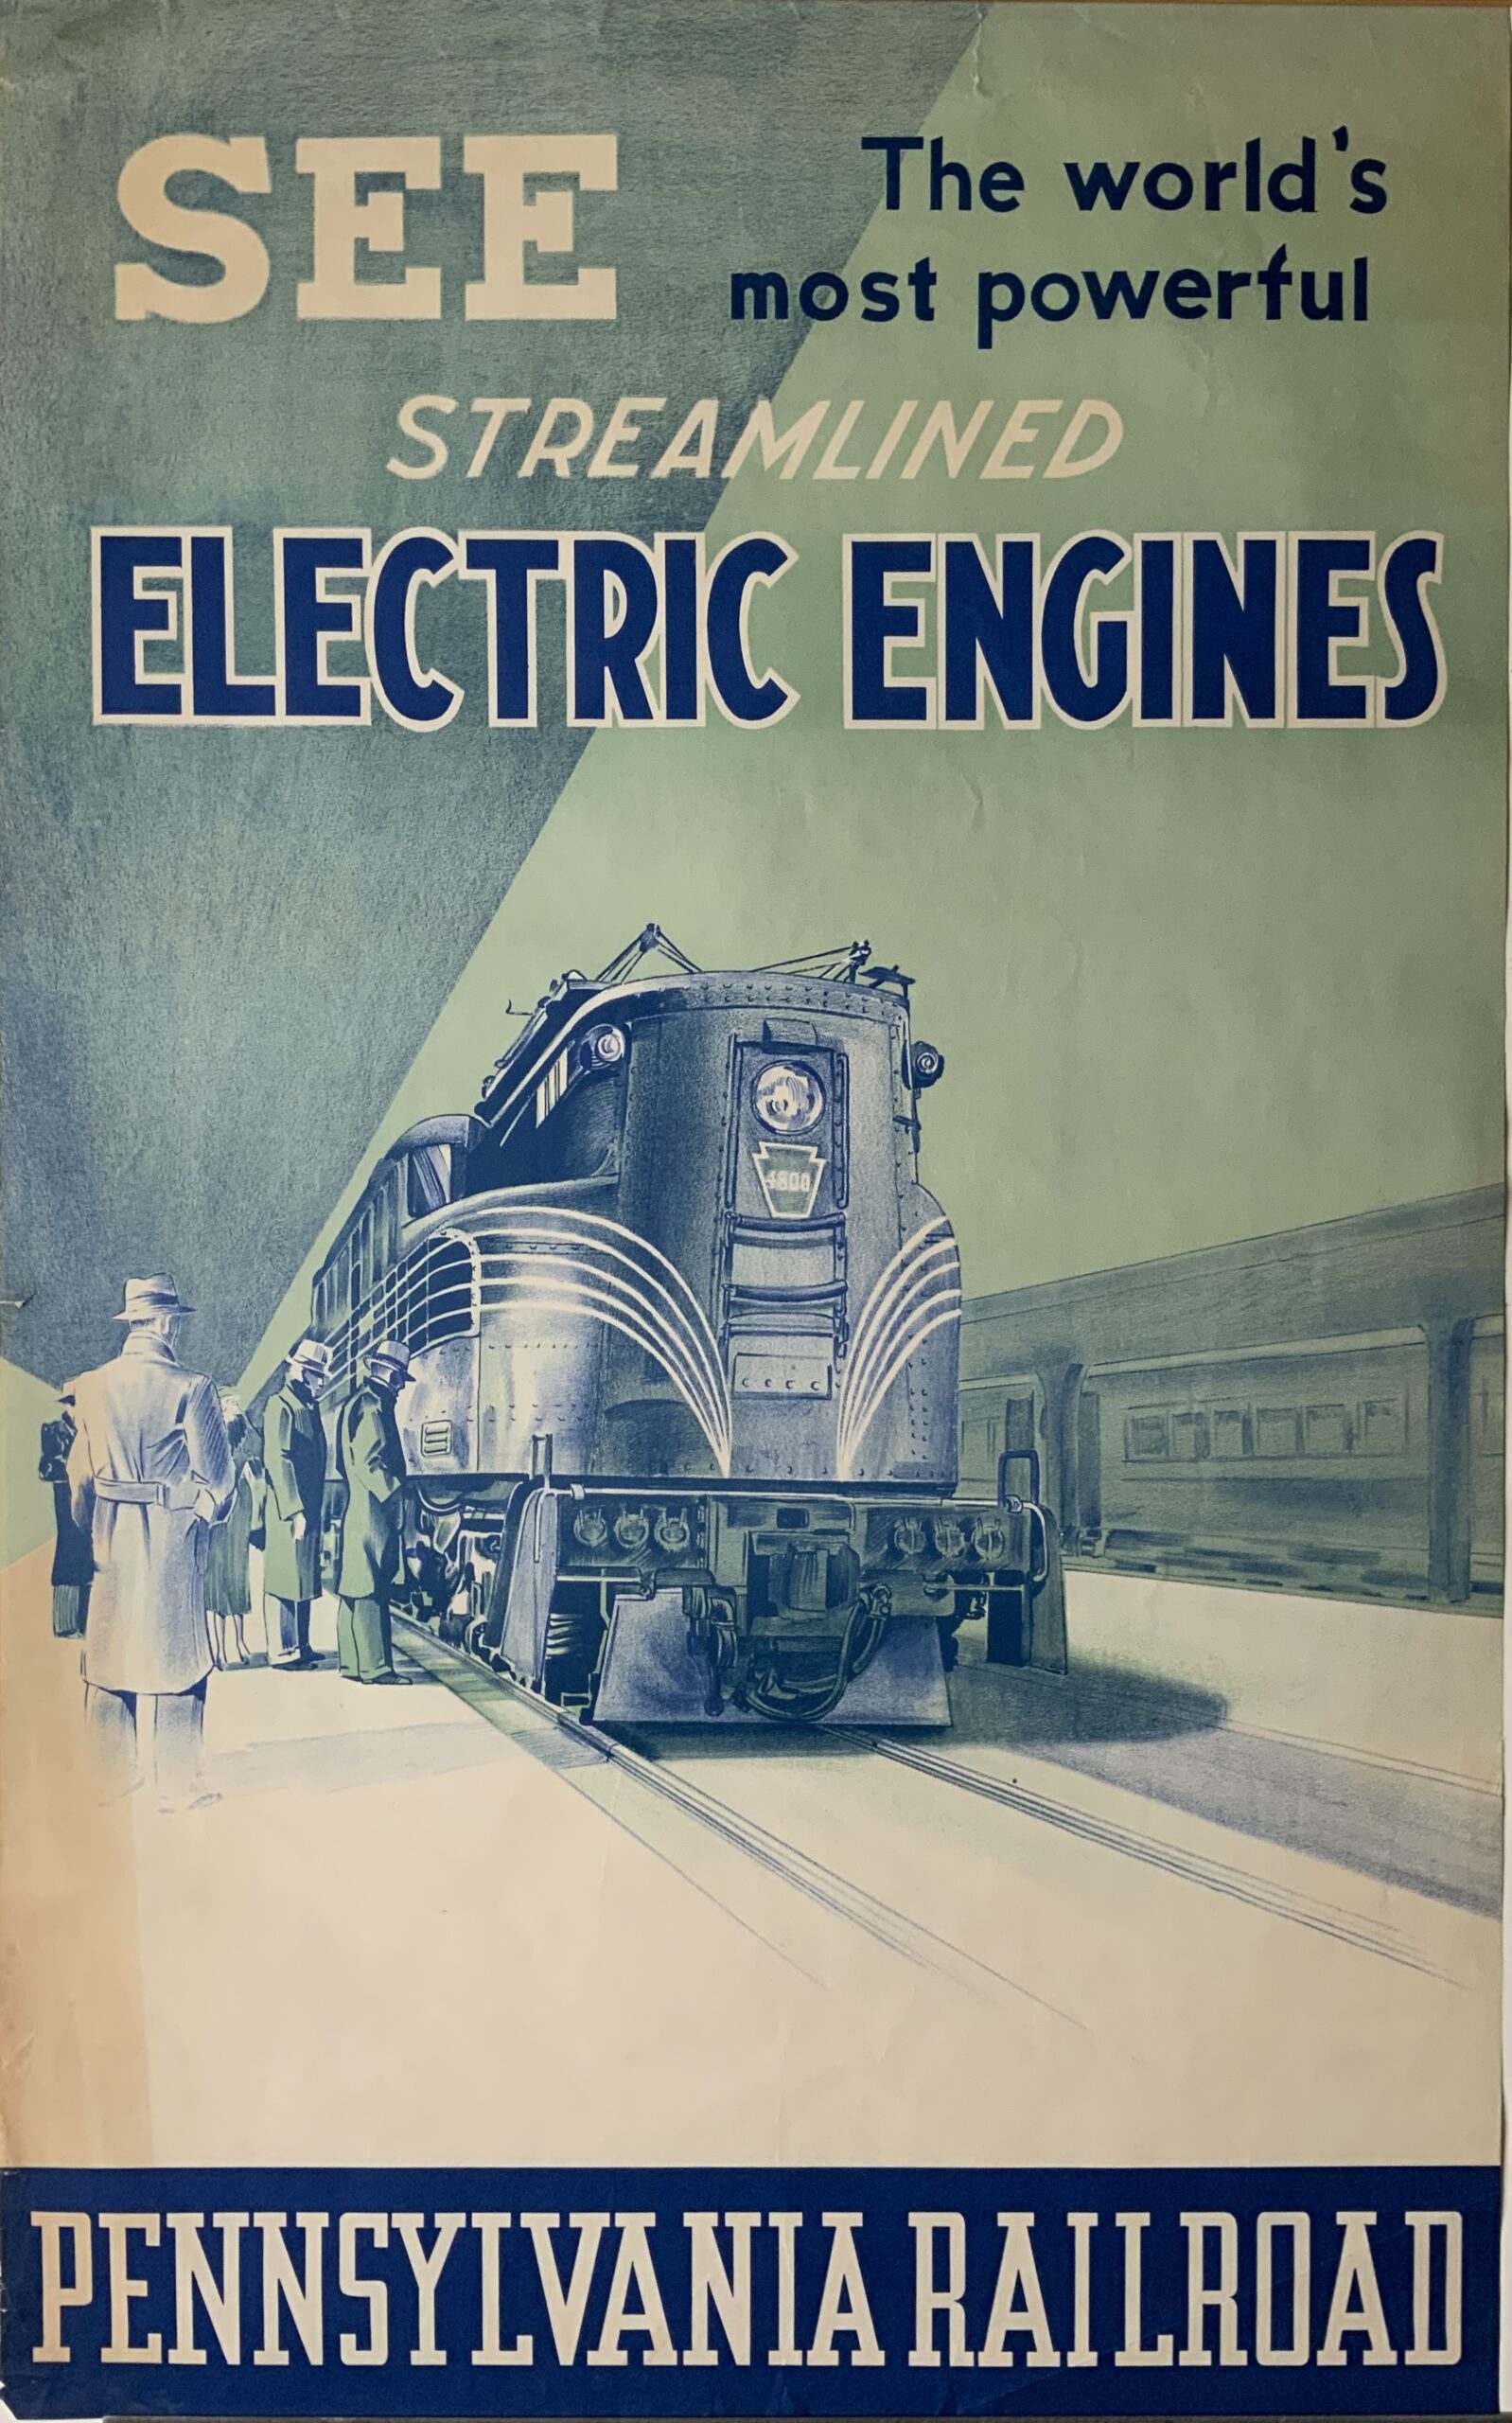 M562	PENNSYLVANIA RAILROAD - SEE THE WORLD’S MOST POWERFUL STREAMLINED ELECTRIC ENGINES